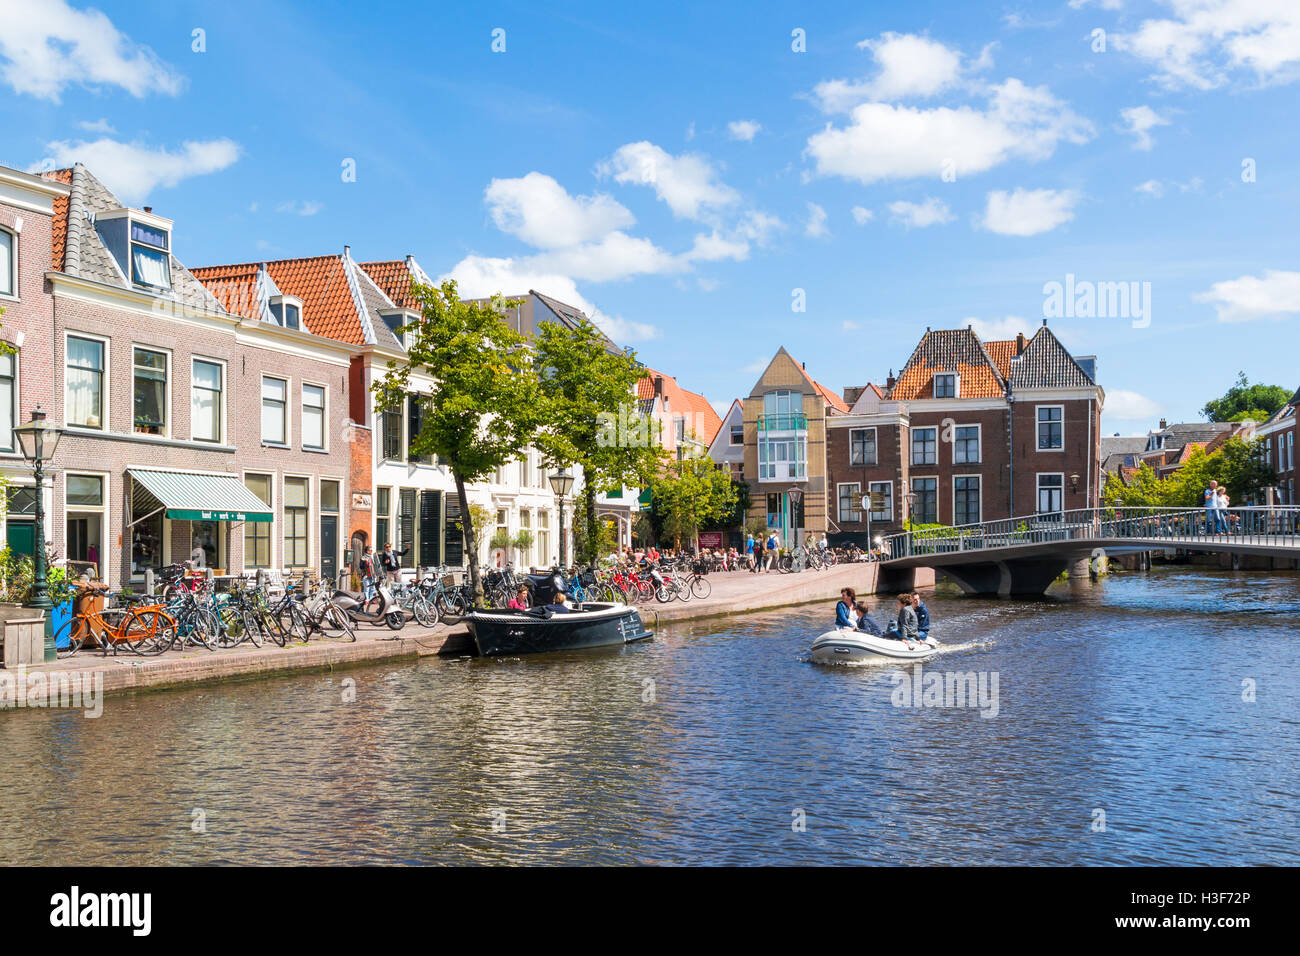 People in boat on Stille Rhine canal in old town of Leiden, South Holland, Netherlands Stock Photo